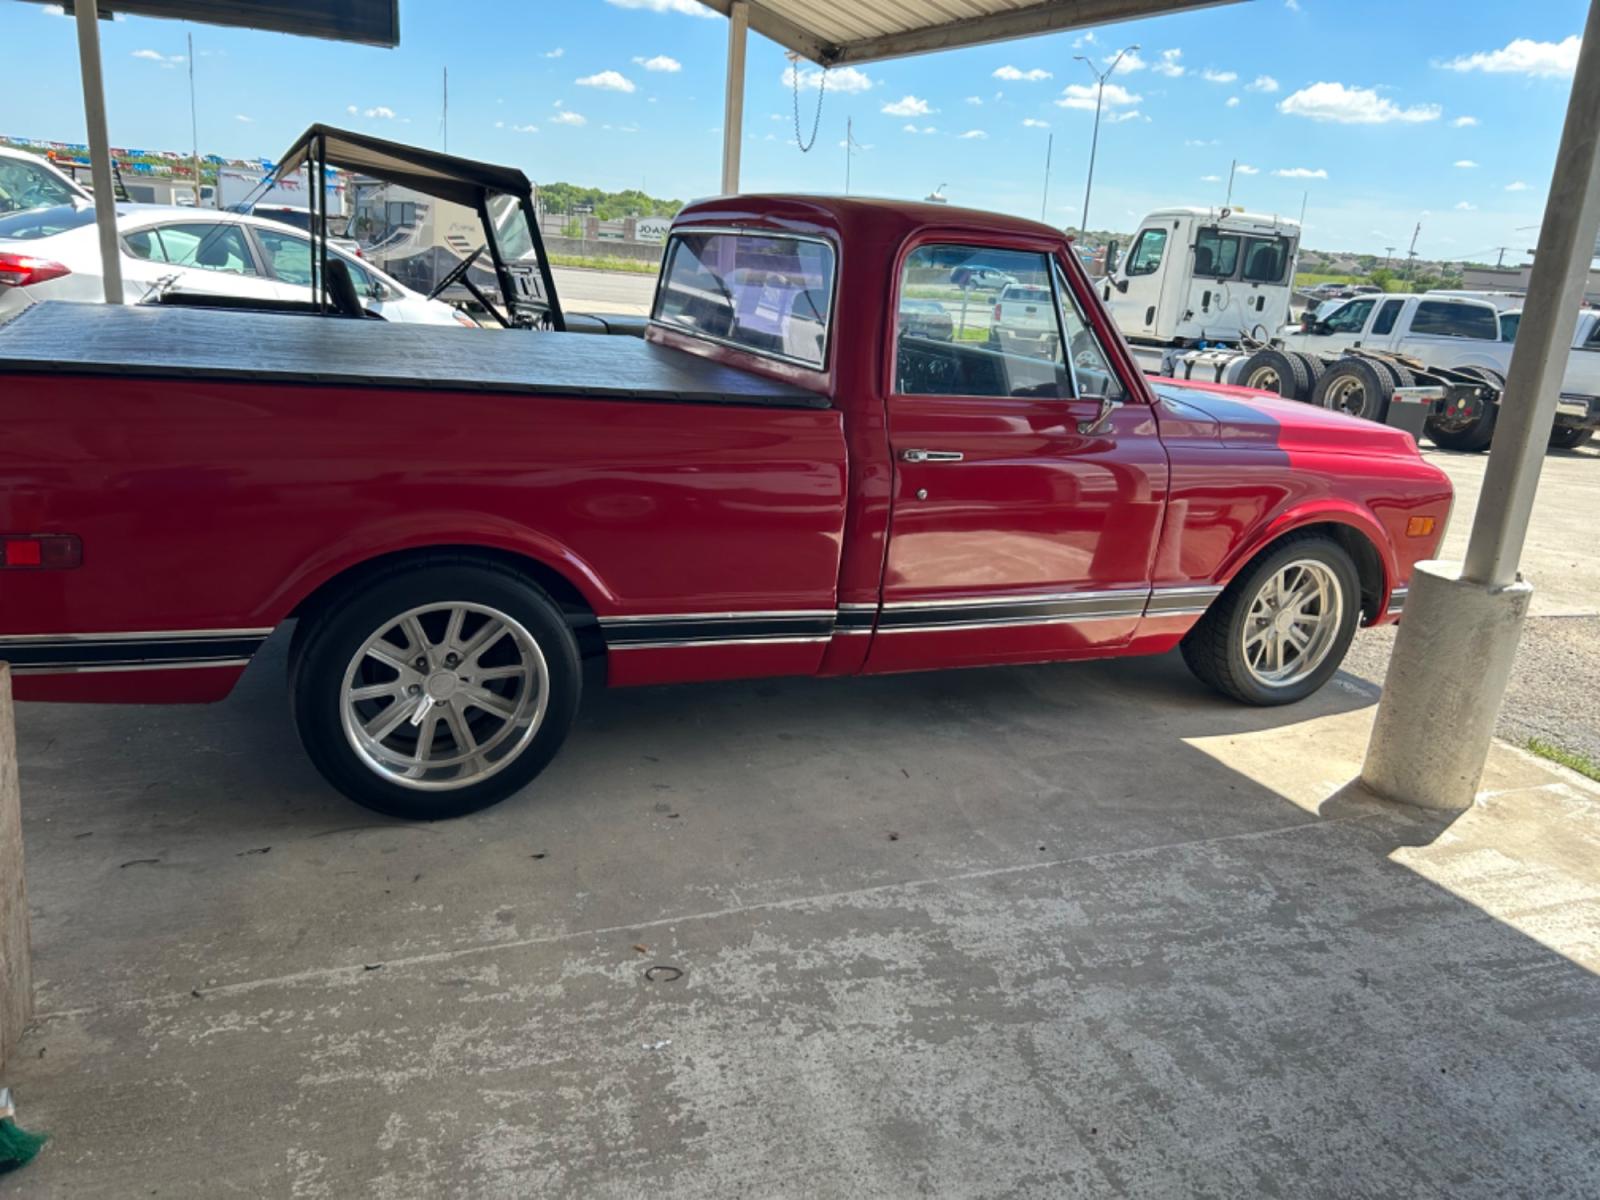 1972 Red Chevrolet C10 (CCE142A1201) , located at 1687 Business 35 S, New Braunfels, TX, 78130, (830) 625-7159, 29.655487, -98.051491 - Photo #4